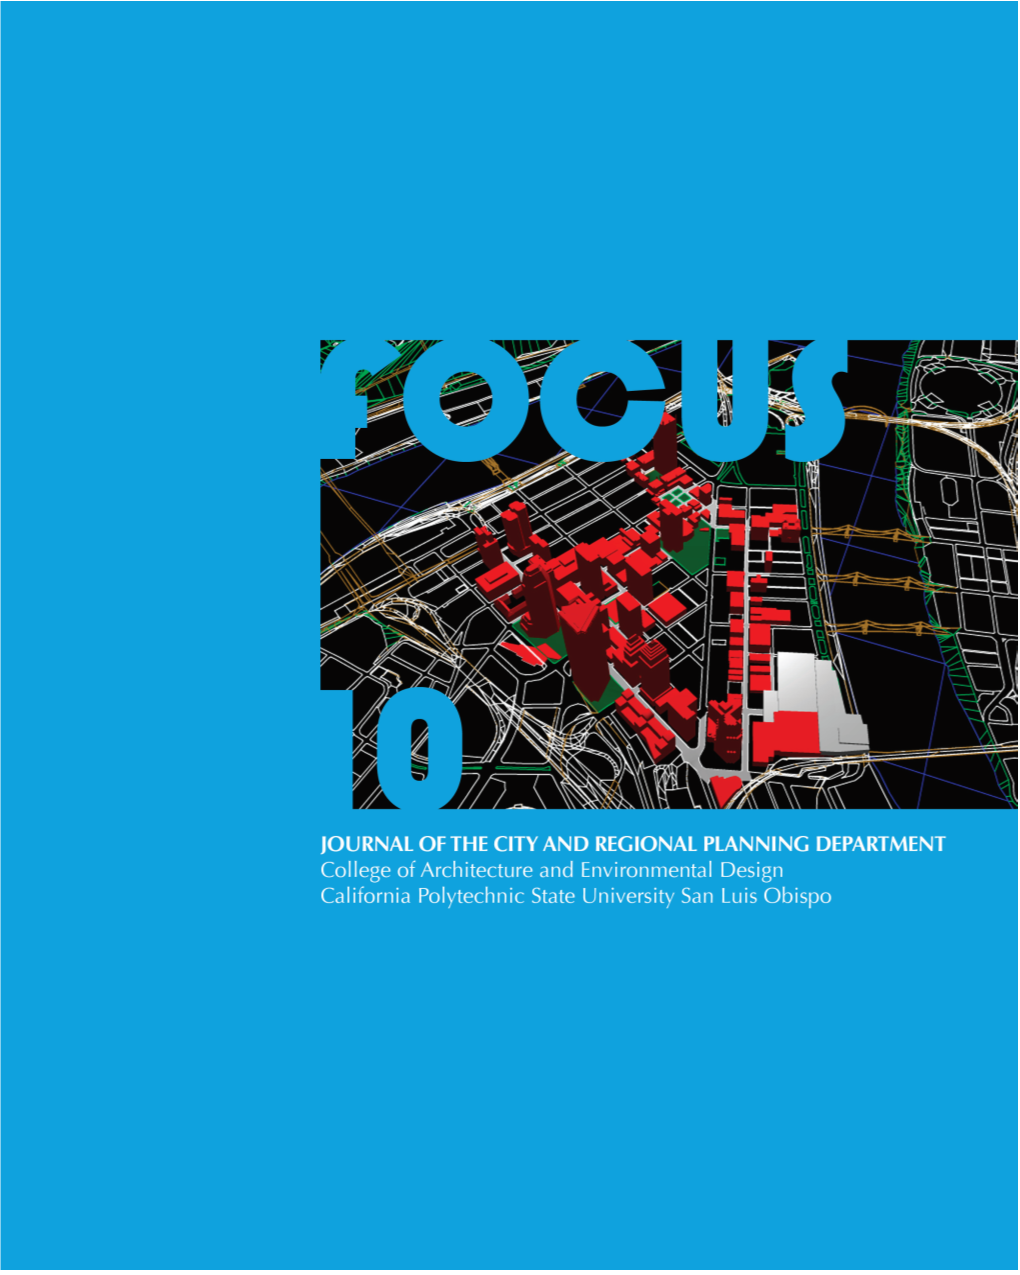 Journal of the City and Regional Planning Department